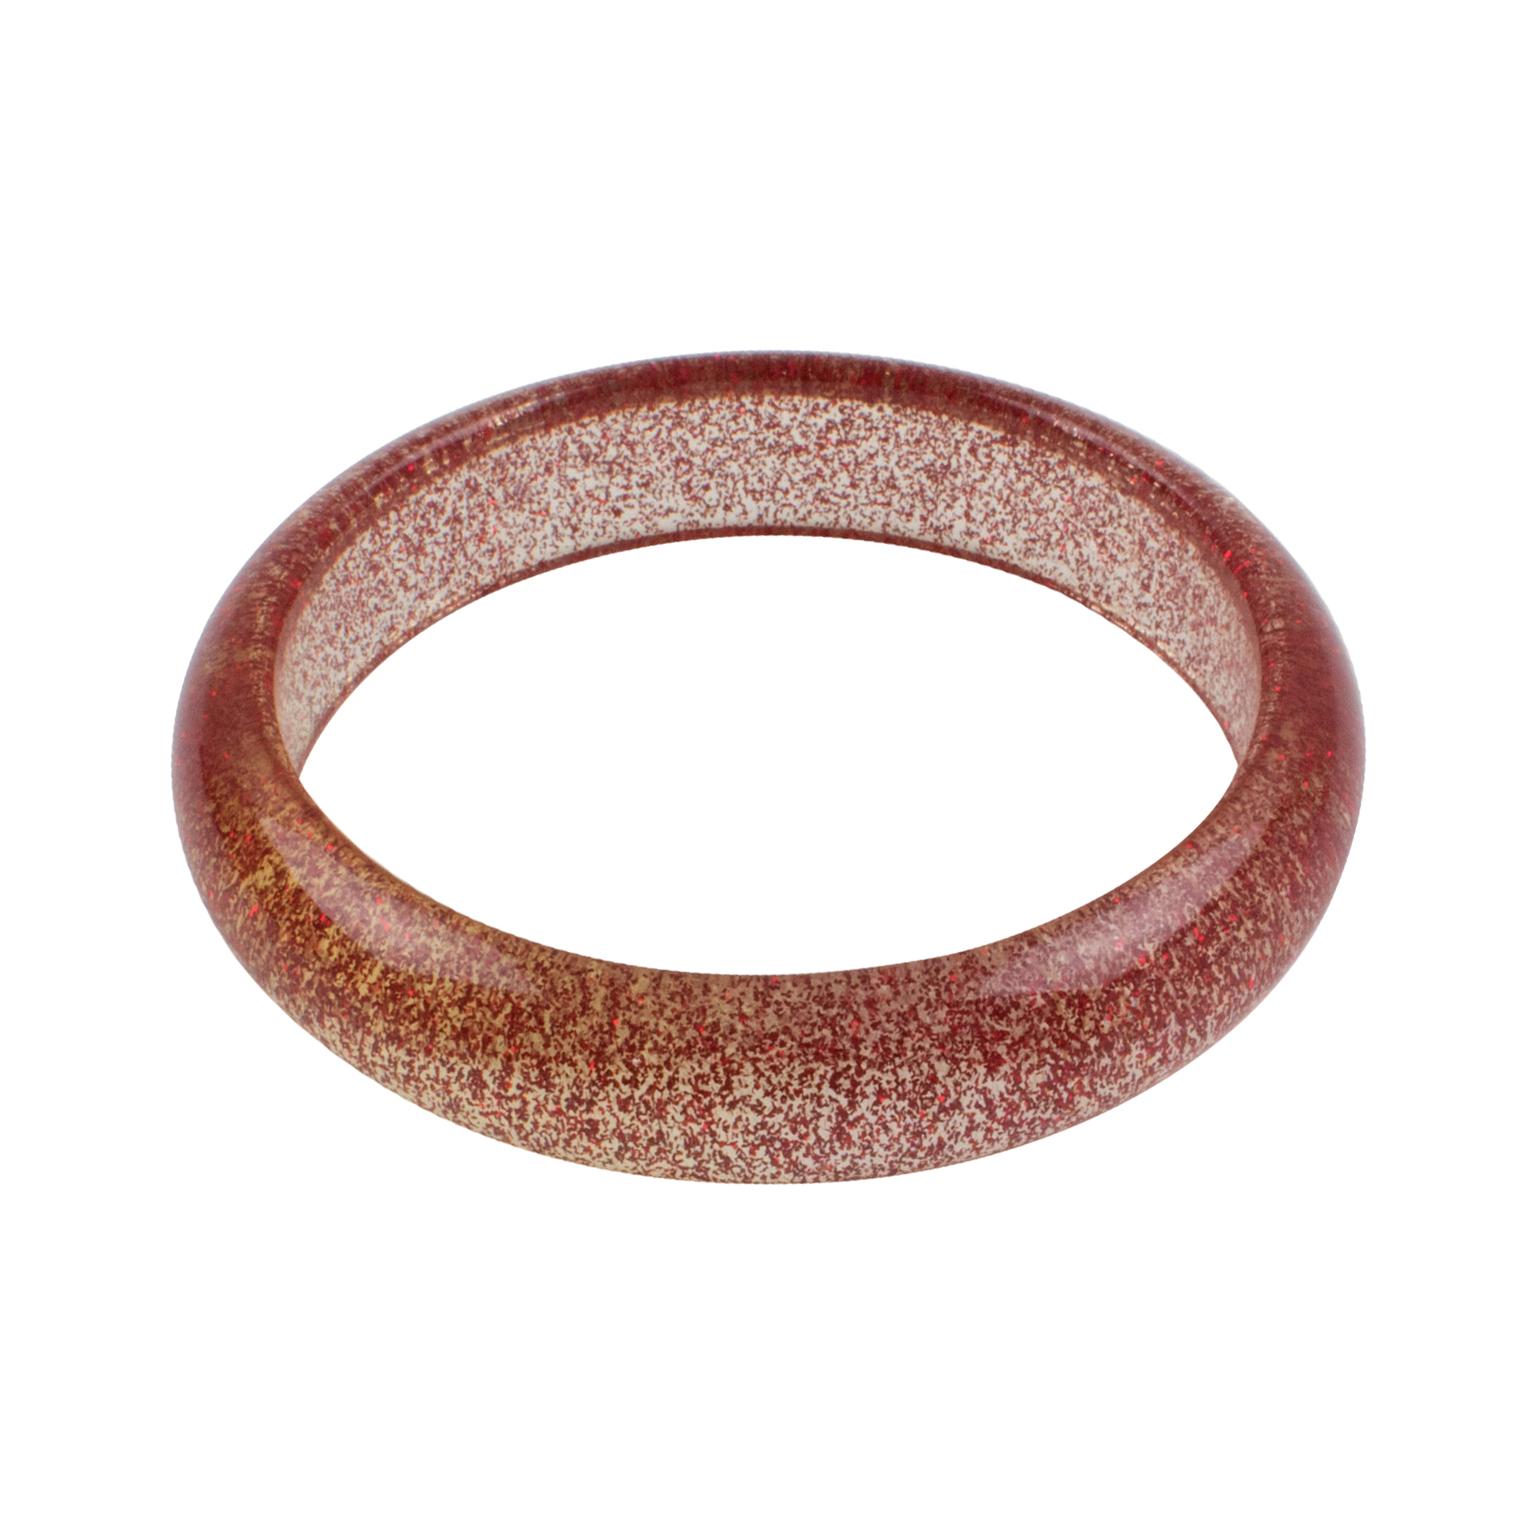 This charming Lucite bracelet features a  domed bangle shape in clear Lucite injected with metallic confetti inclusions in red color. The metallic confetti glitter is like that of Christmas decorations. There is no visible maker's